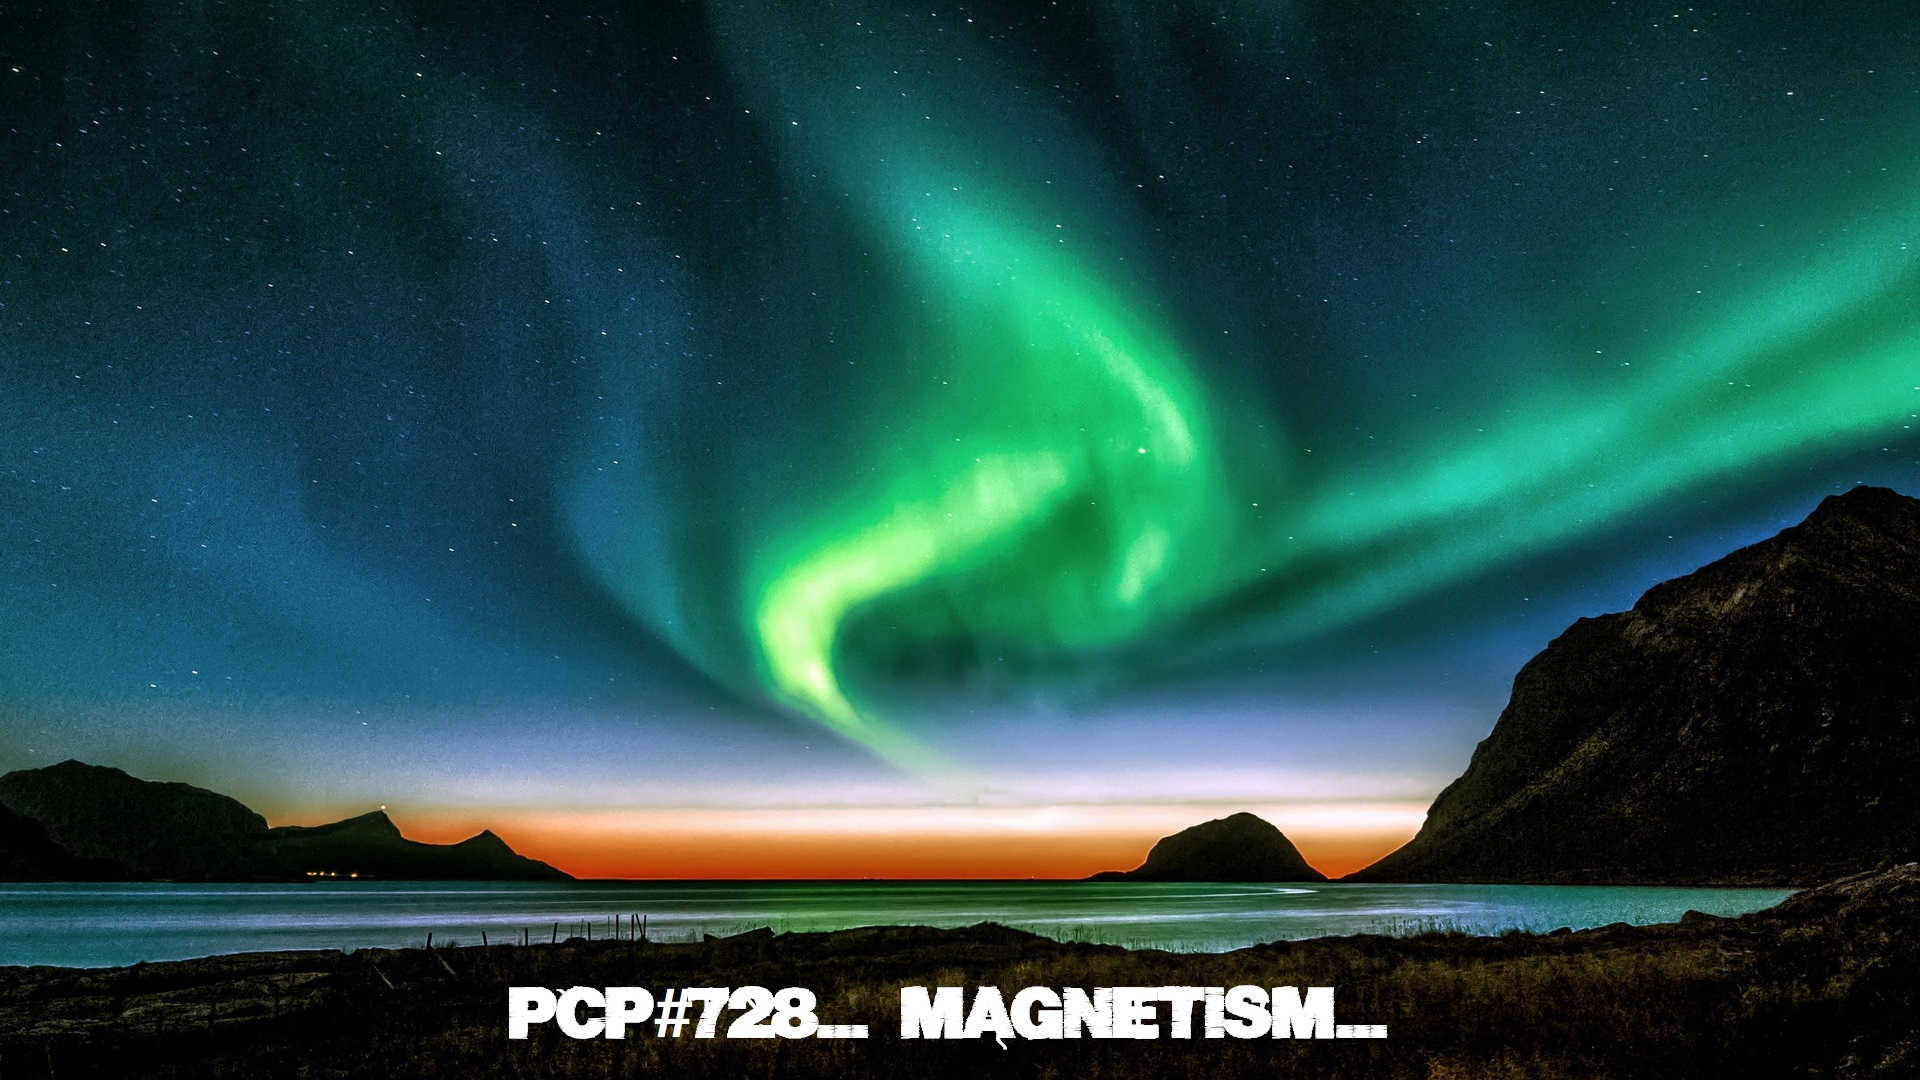 PCP#728... Magnetism....